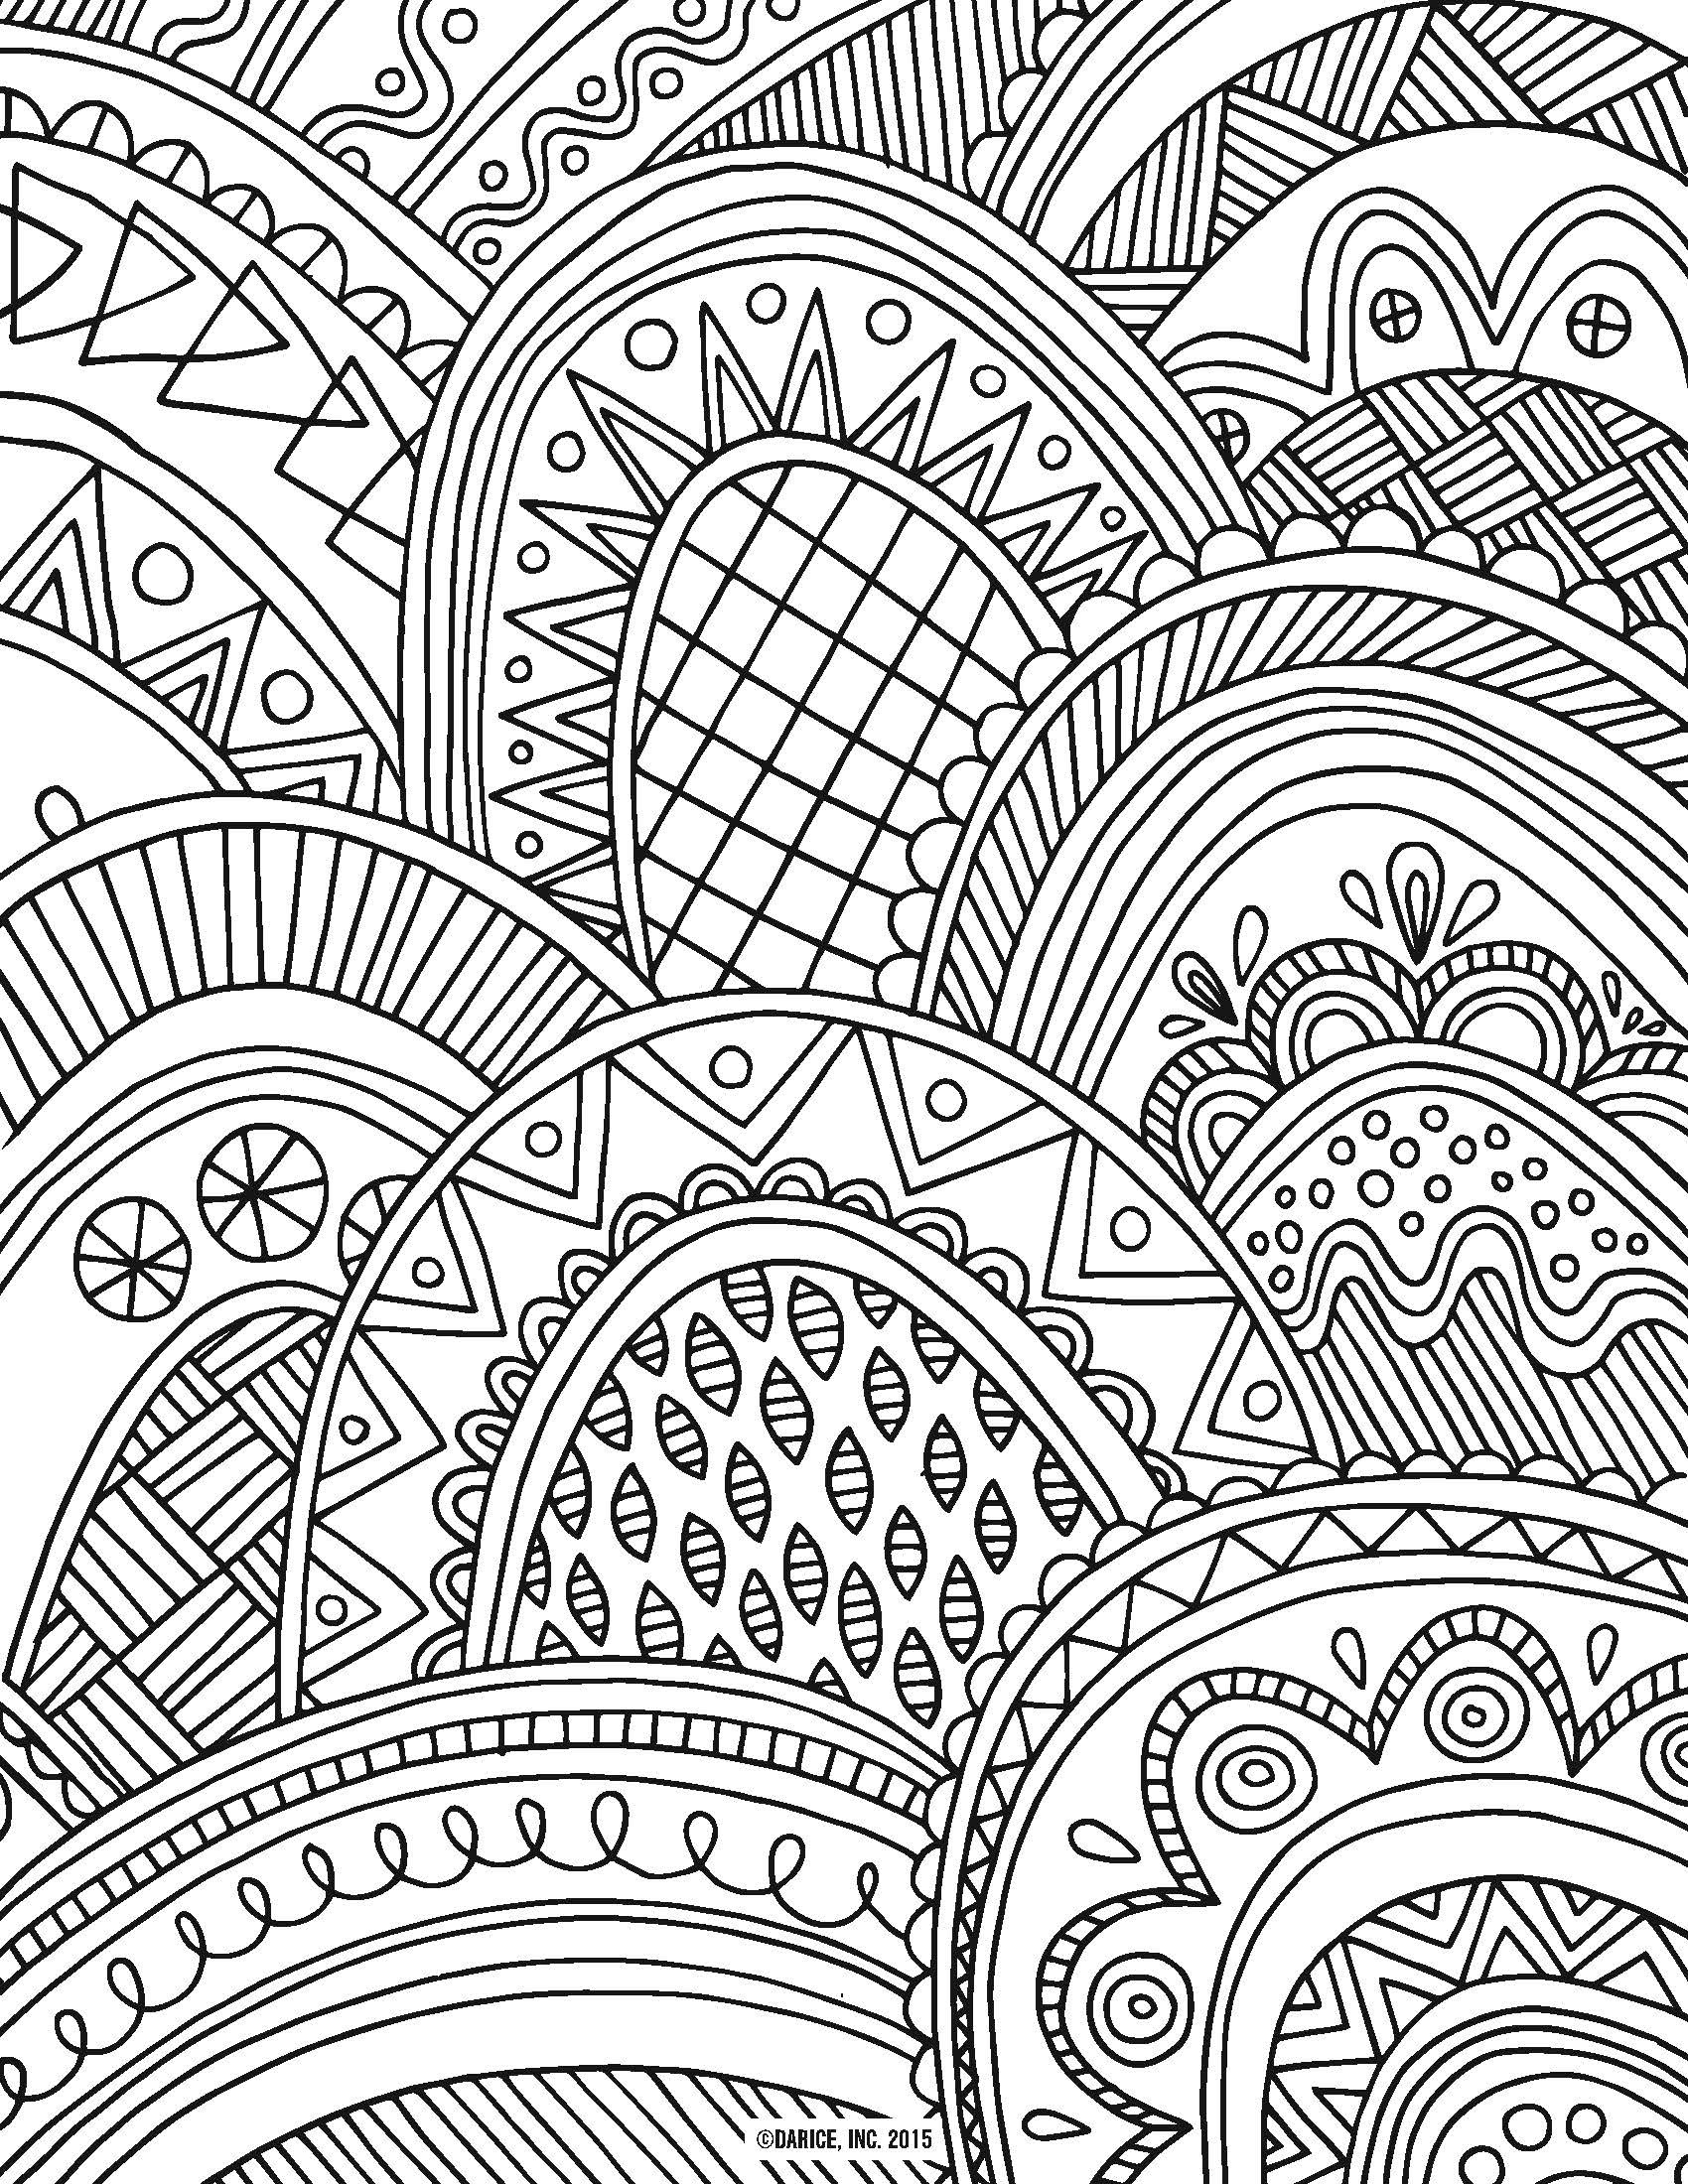 Printable Adult Coloring Book
 20 Attractive Coloring Pages For Adults We Need Fun